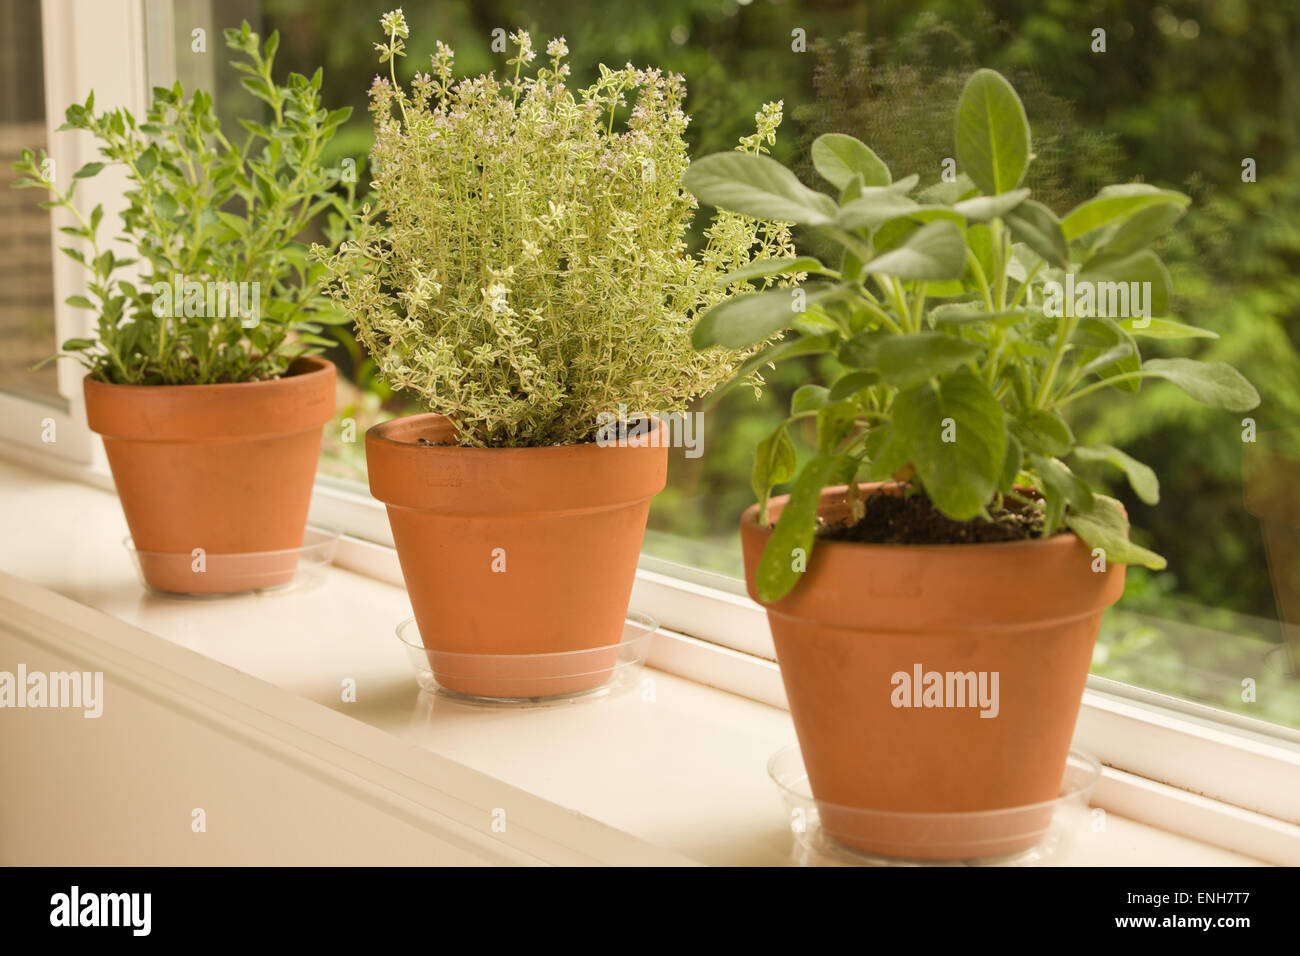 Three clay pots of herbs, left to right: Greek Oregano, Silver Posie Thyme and Berggarten Sage, growing on a windowsill Stock Photo